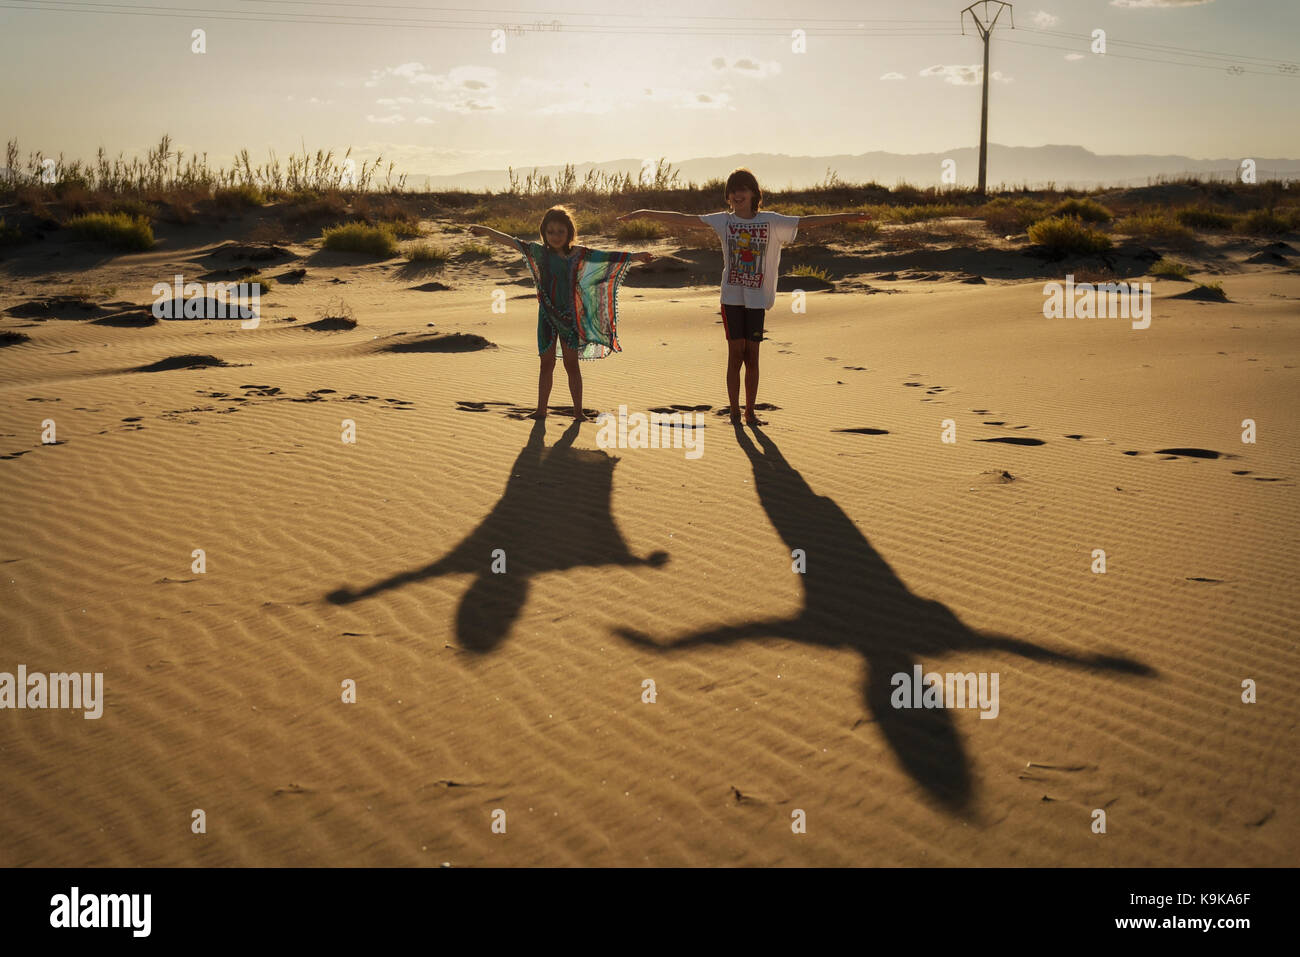 Boy, girl and their shadows standing in on a sandy beach with outstretched arms Stock Photo